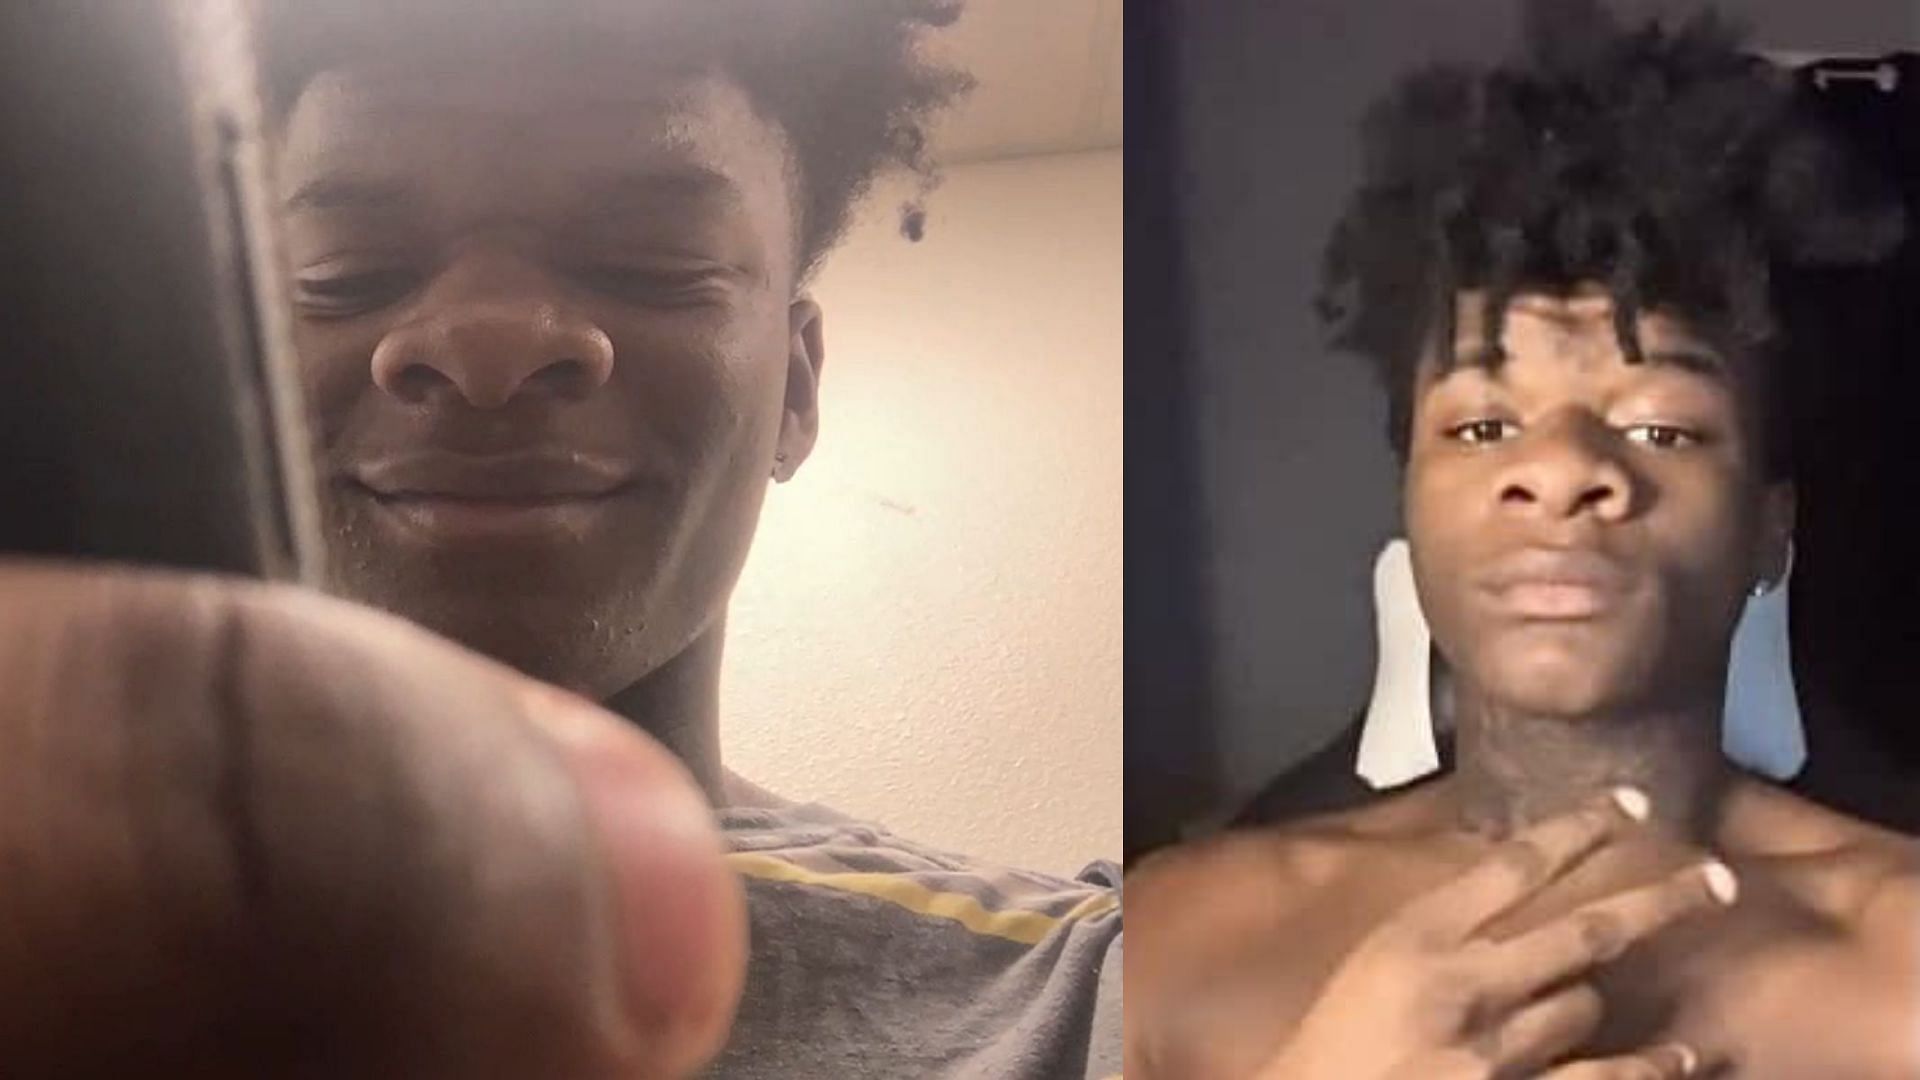 Kick streamer wanted by the police for threatening student on stream (Image via TreyLiving/Kick, Lamar University Police/ Facebook)